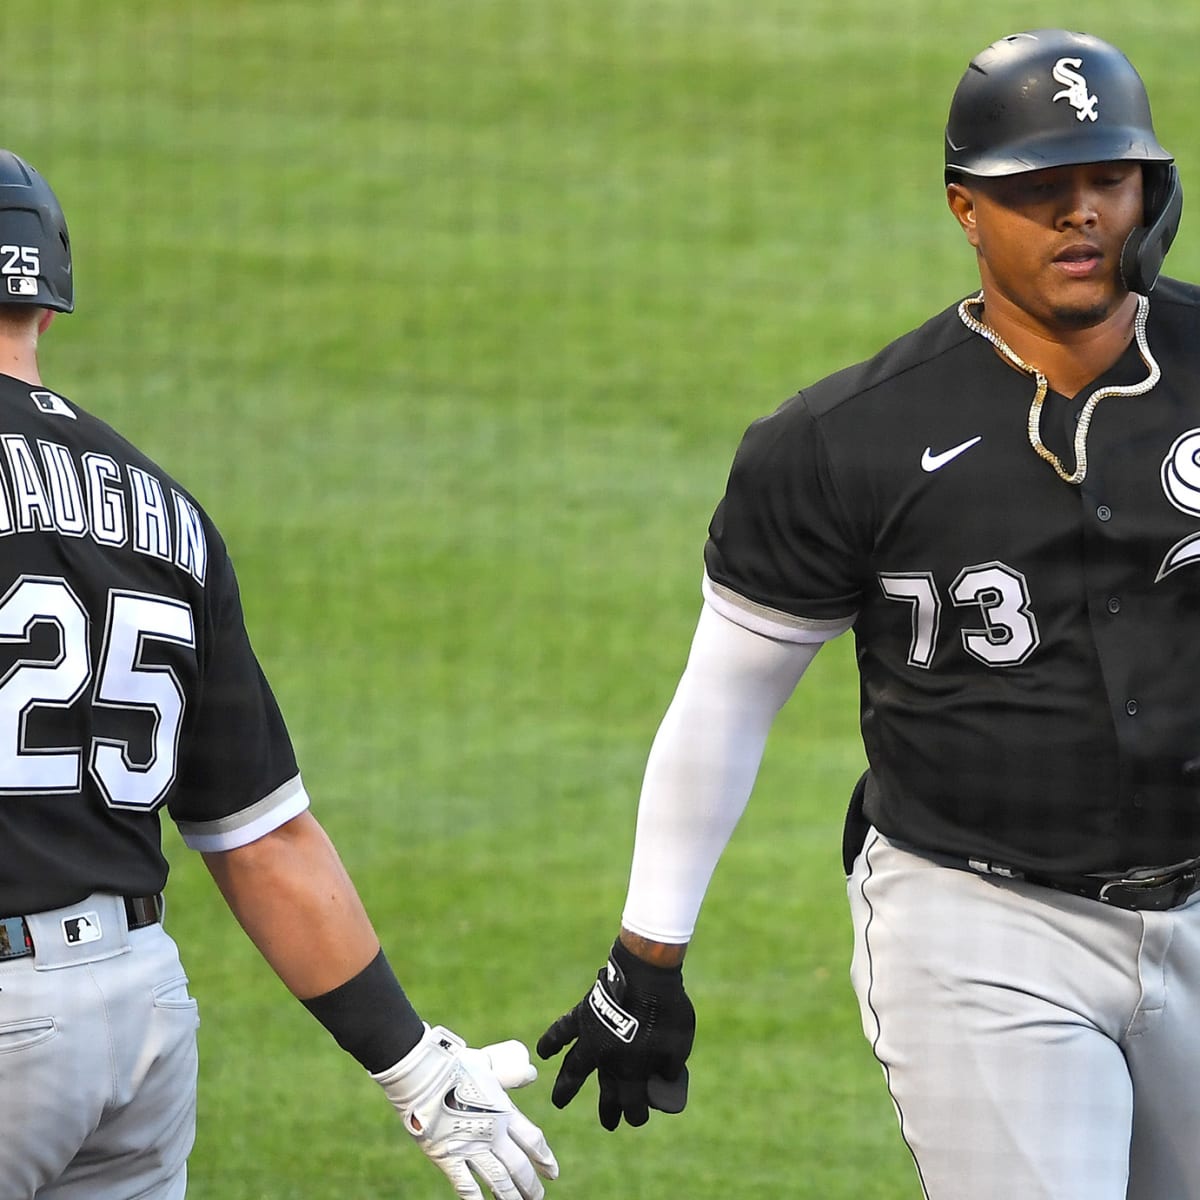 Who is Yermin Mercedes? What to know about hot-hitting White Sox